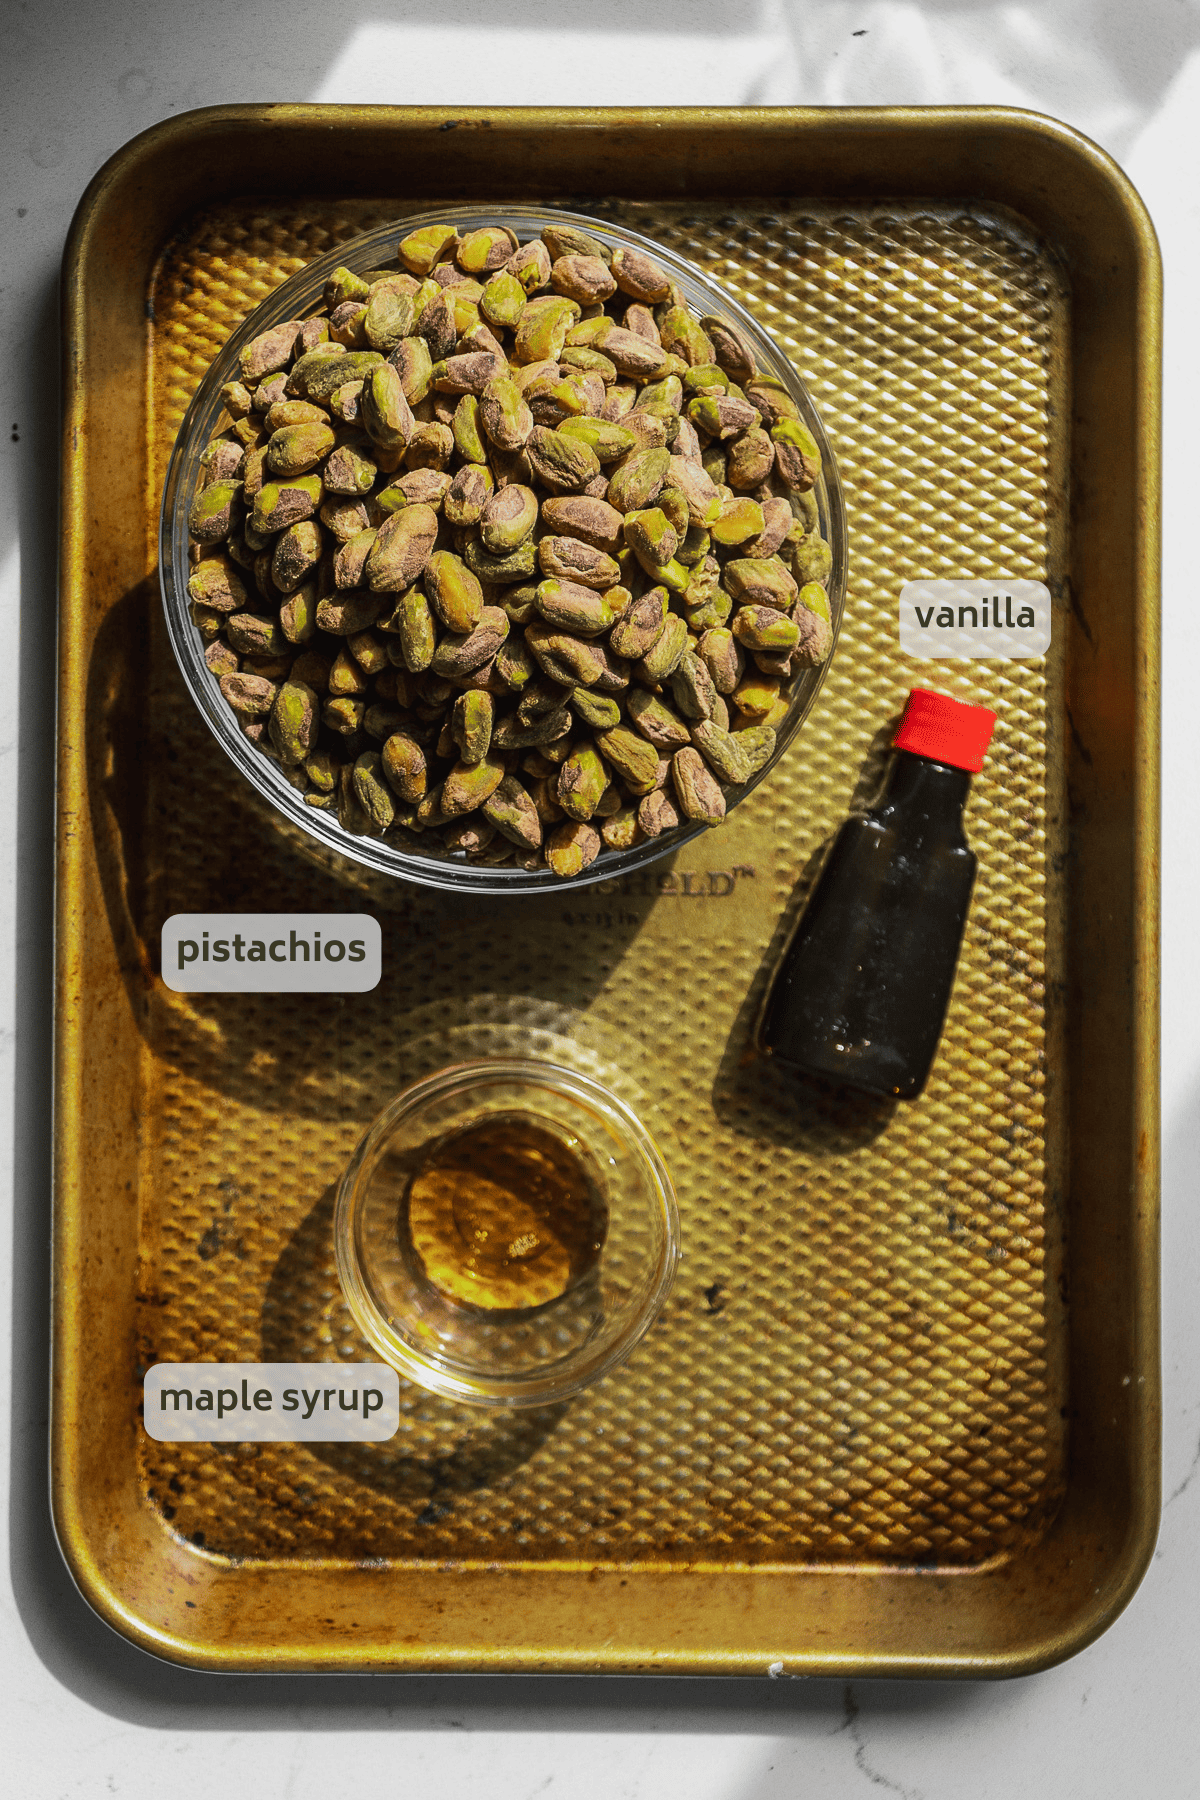 Pistachio butter ingredients on a gold baking sheet.